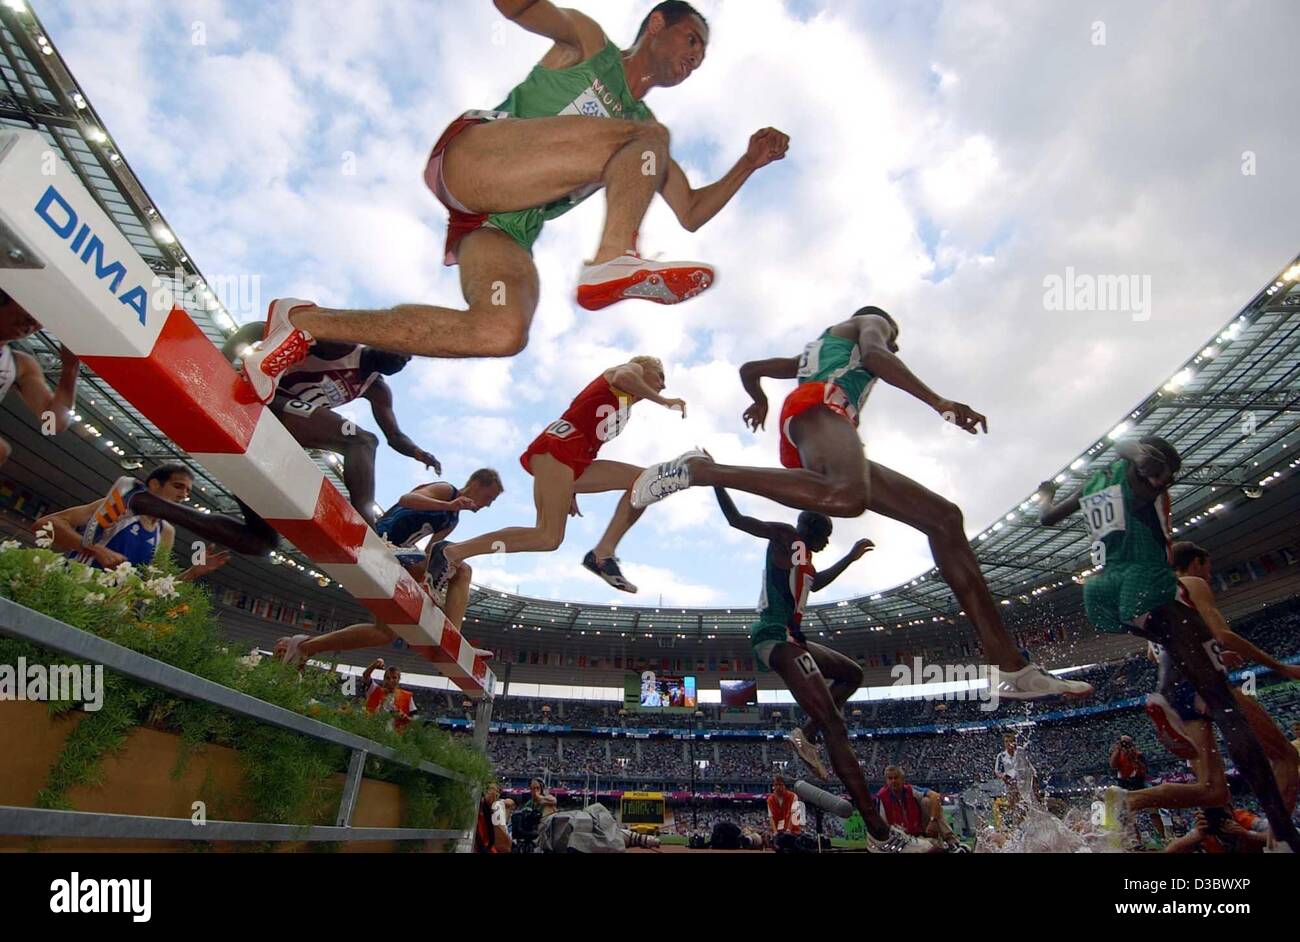 (dpa) - The runners of the 3,000 m steeple chase event clear a hurdle and a moat during the preliminaries at the 9th IAAF Athletic World Championships at the Stade de France in Paris, 23 August 2003. Stock Photo